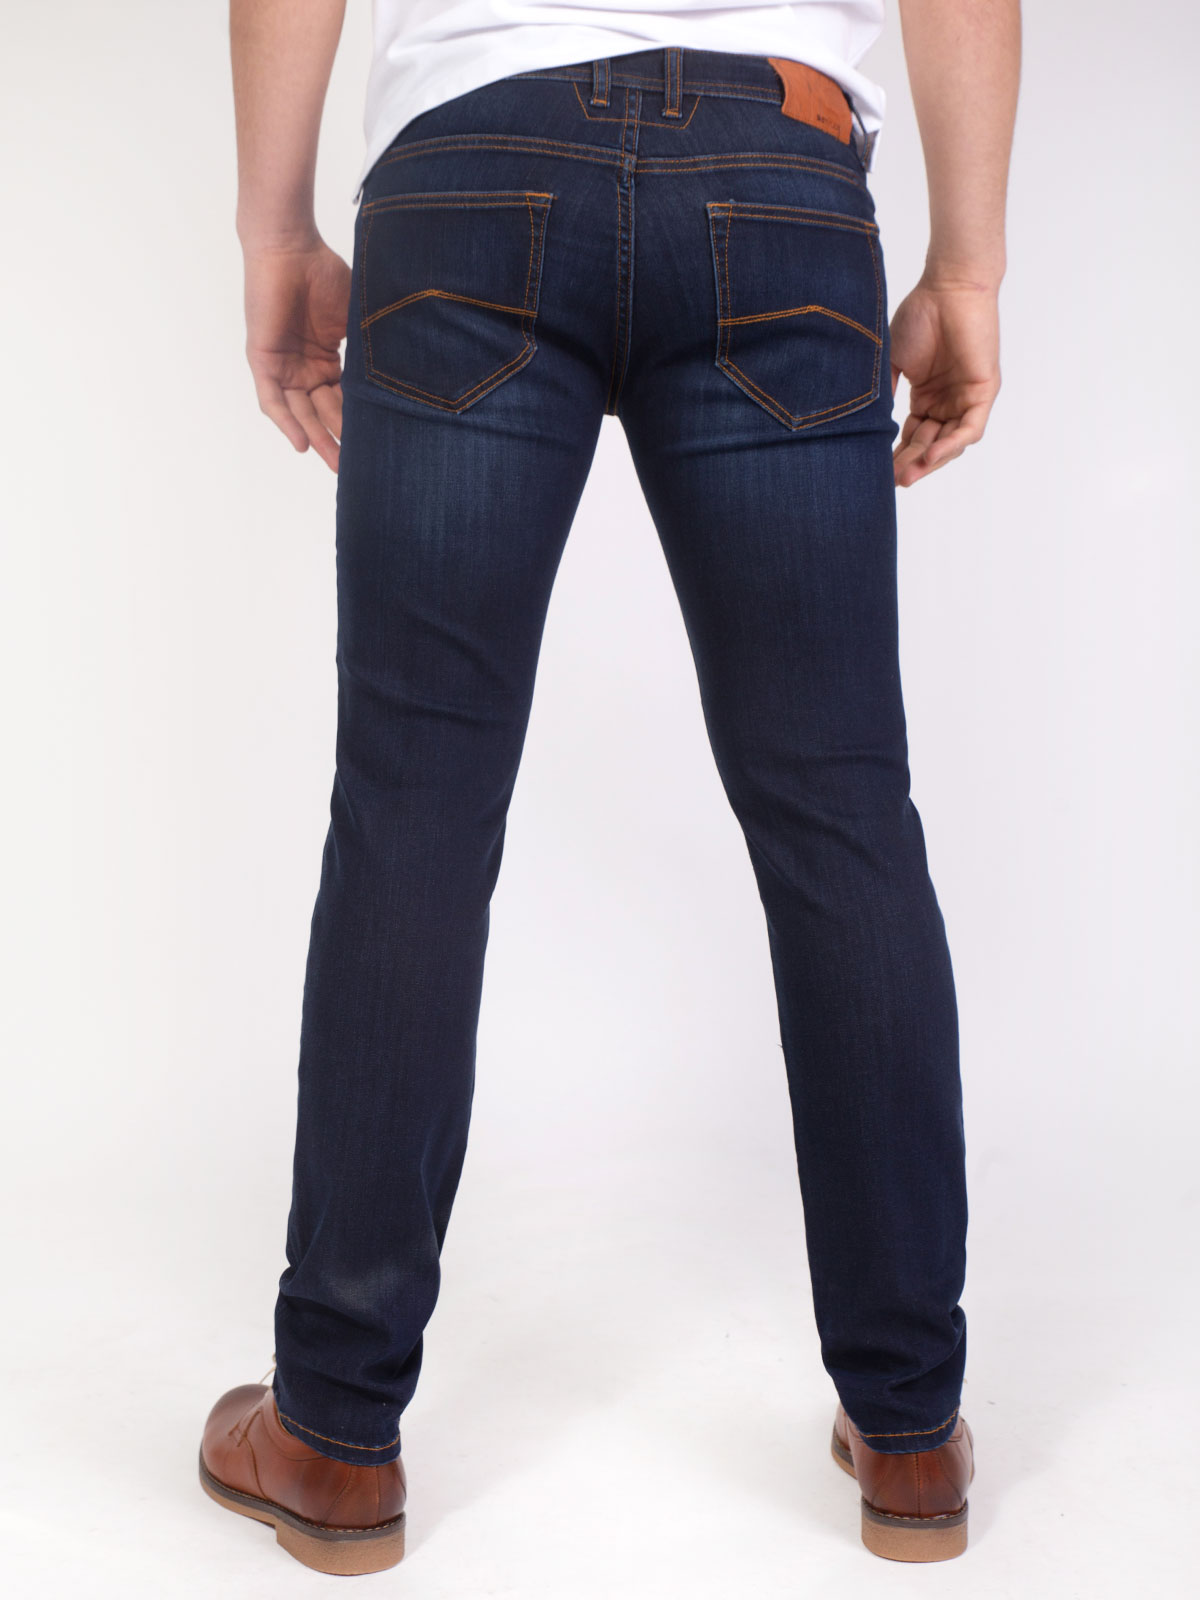 Buy Red Tape Denim Jeans Online At Best Price Offers In India